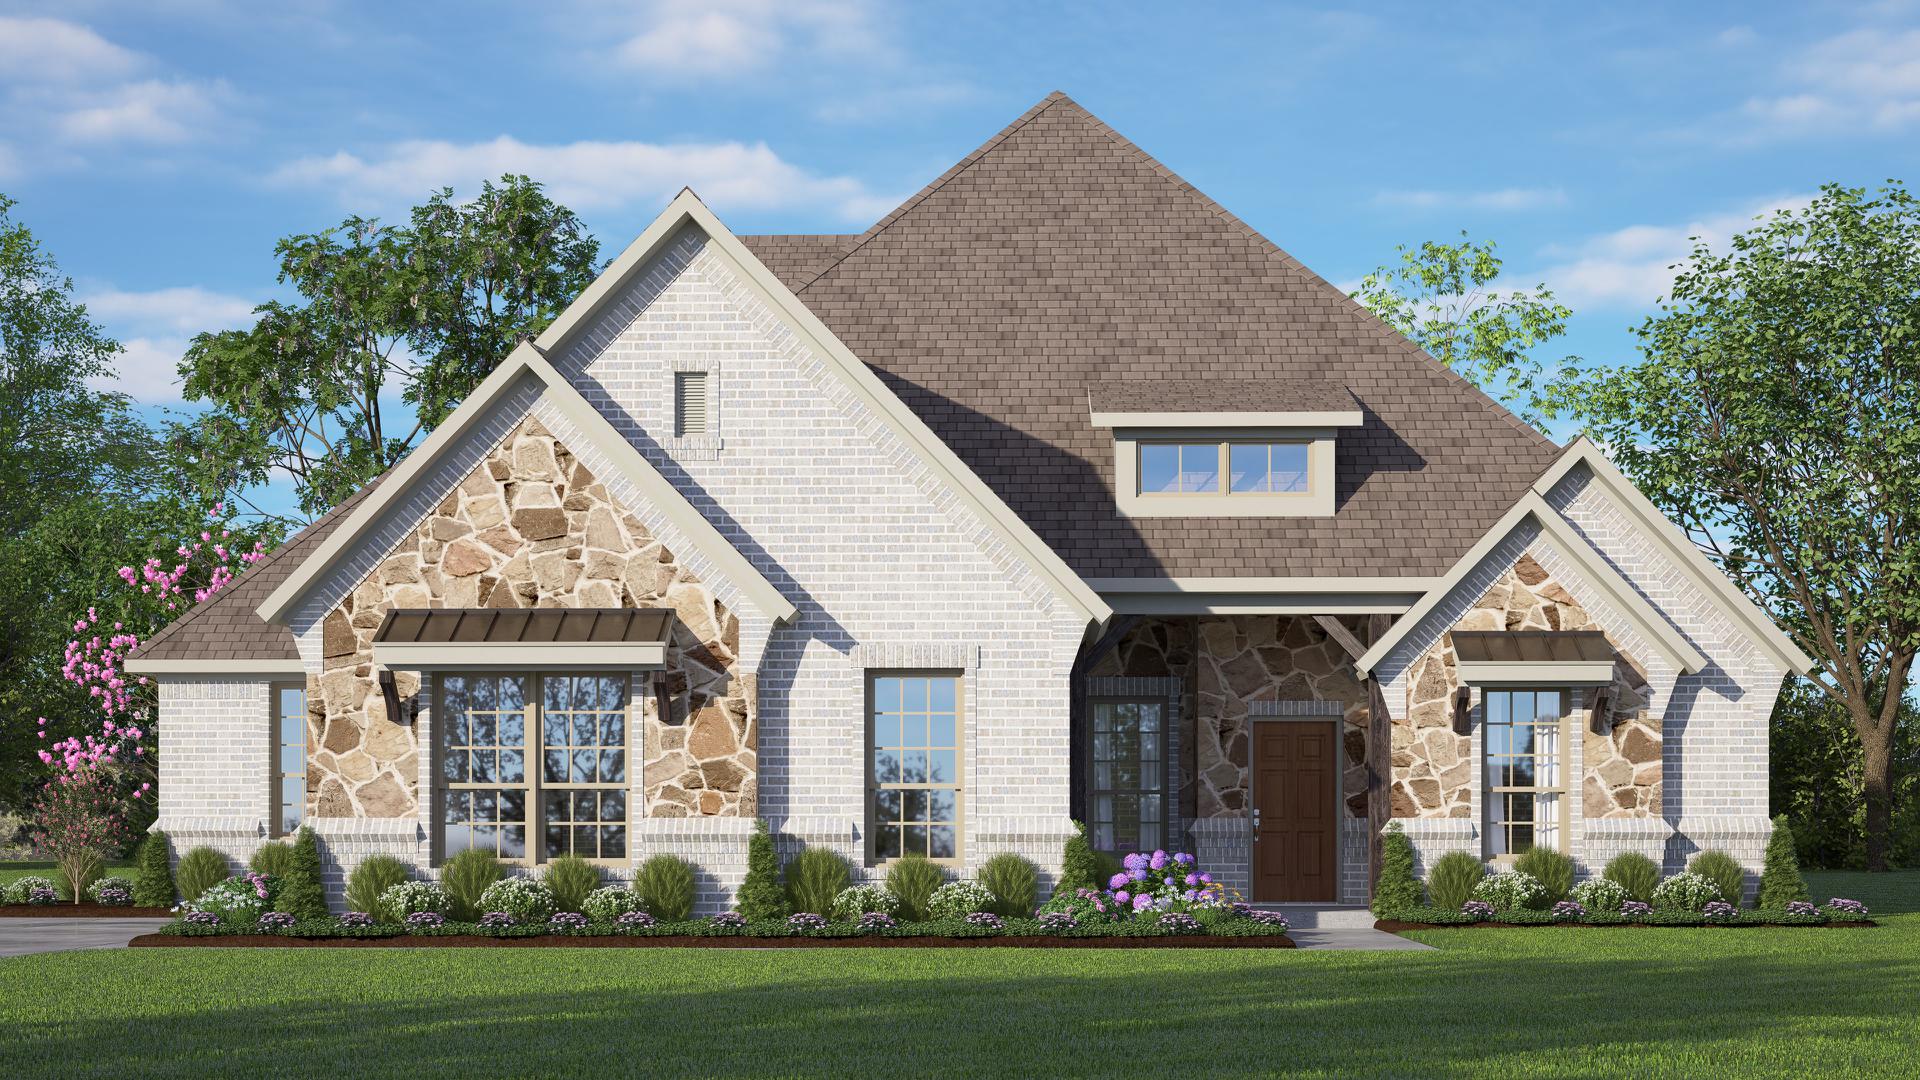 2555 C with Stone. 2,555sf New Home in Waxahachie, TX